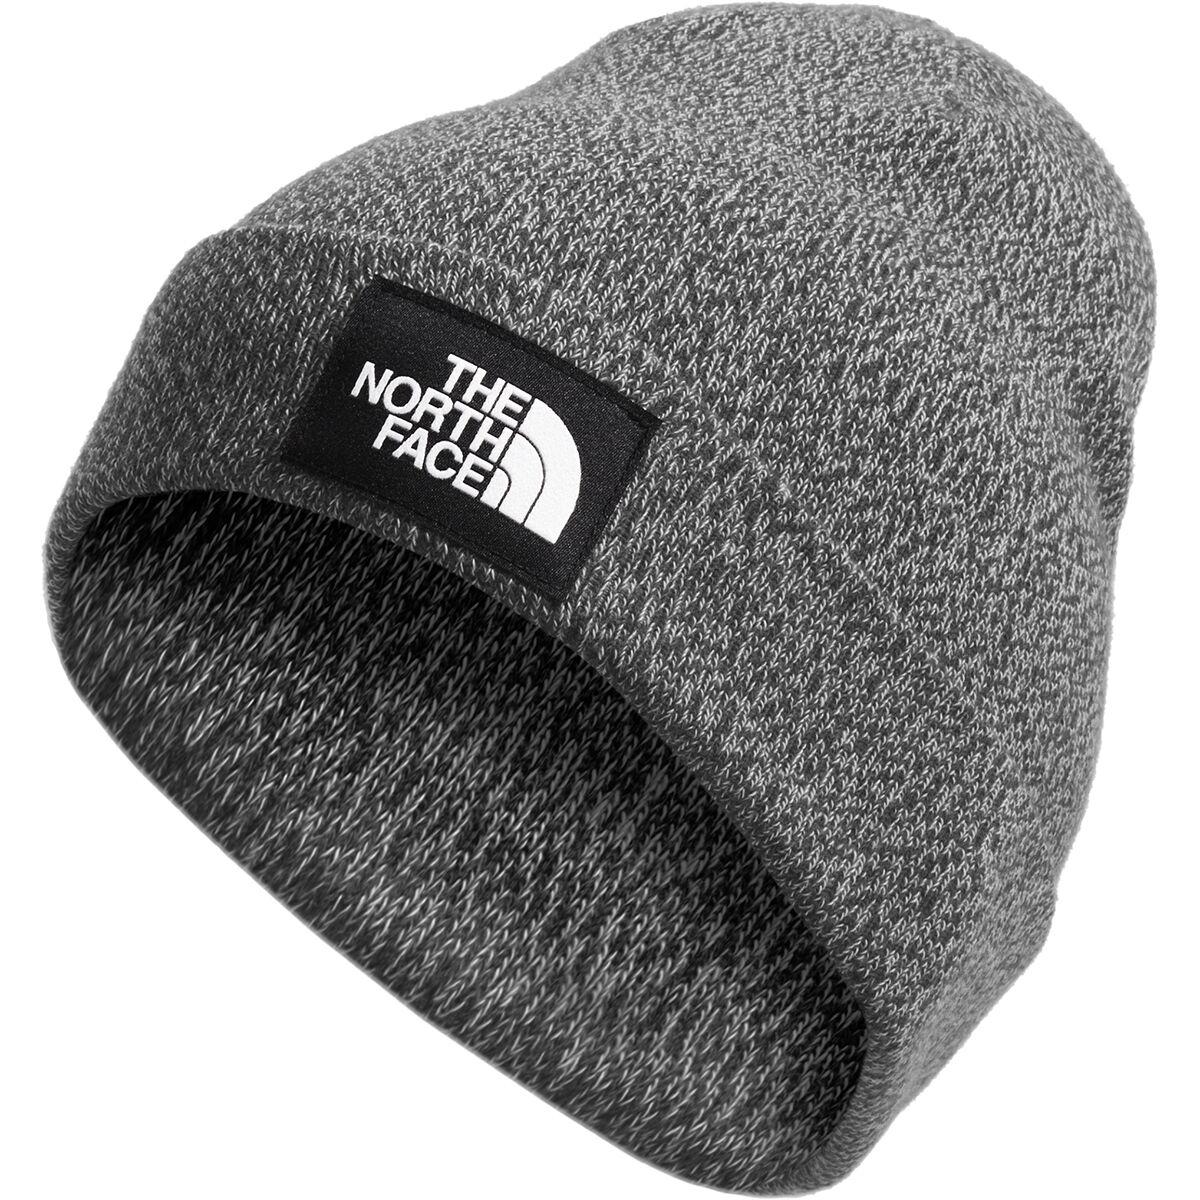 The North Face Synthetic Dock Worker Recycled Beanie in Gray for Men - Lyst